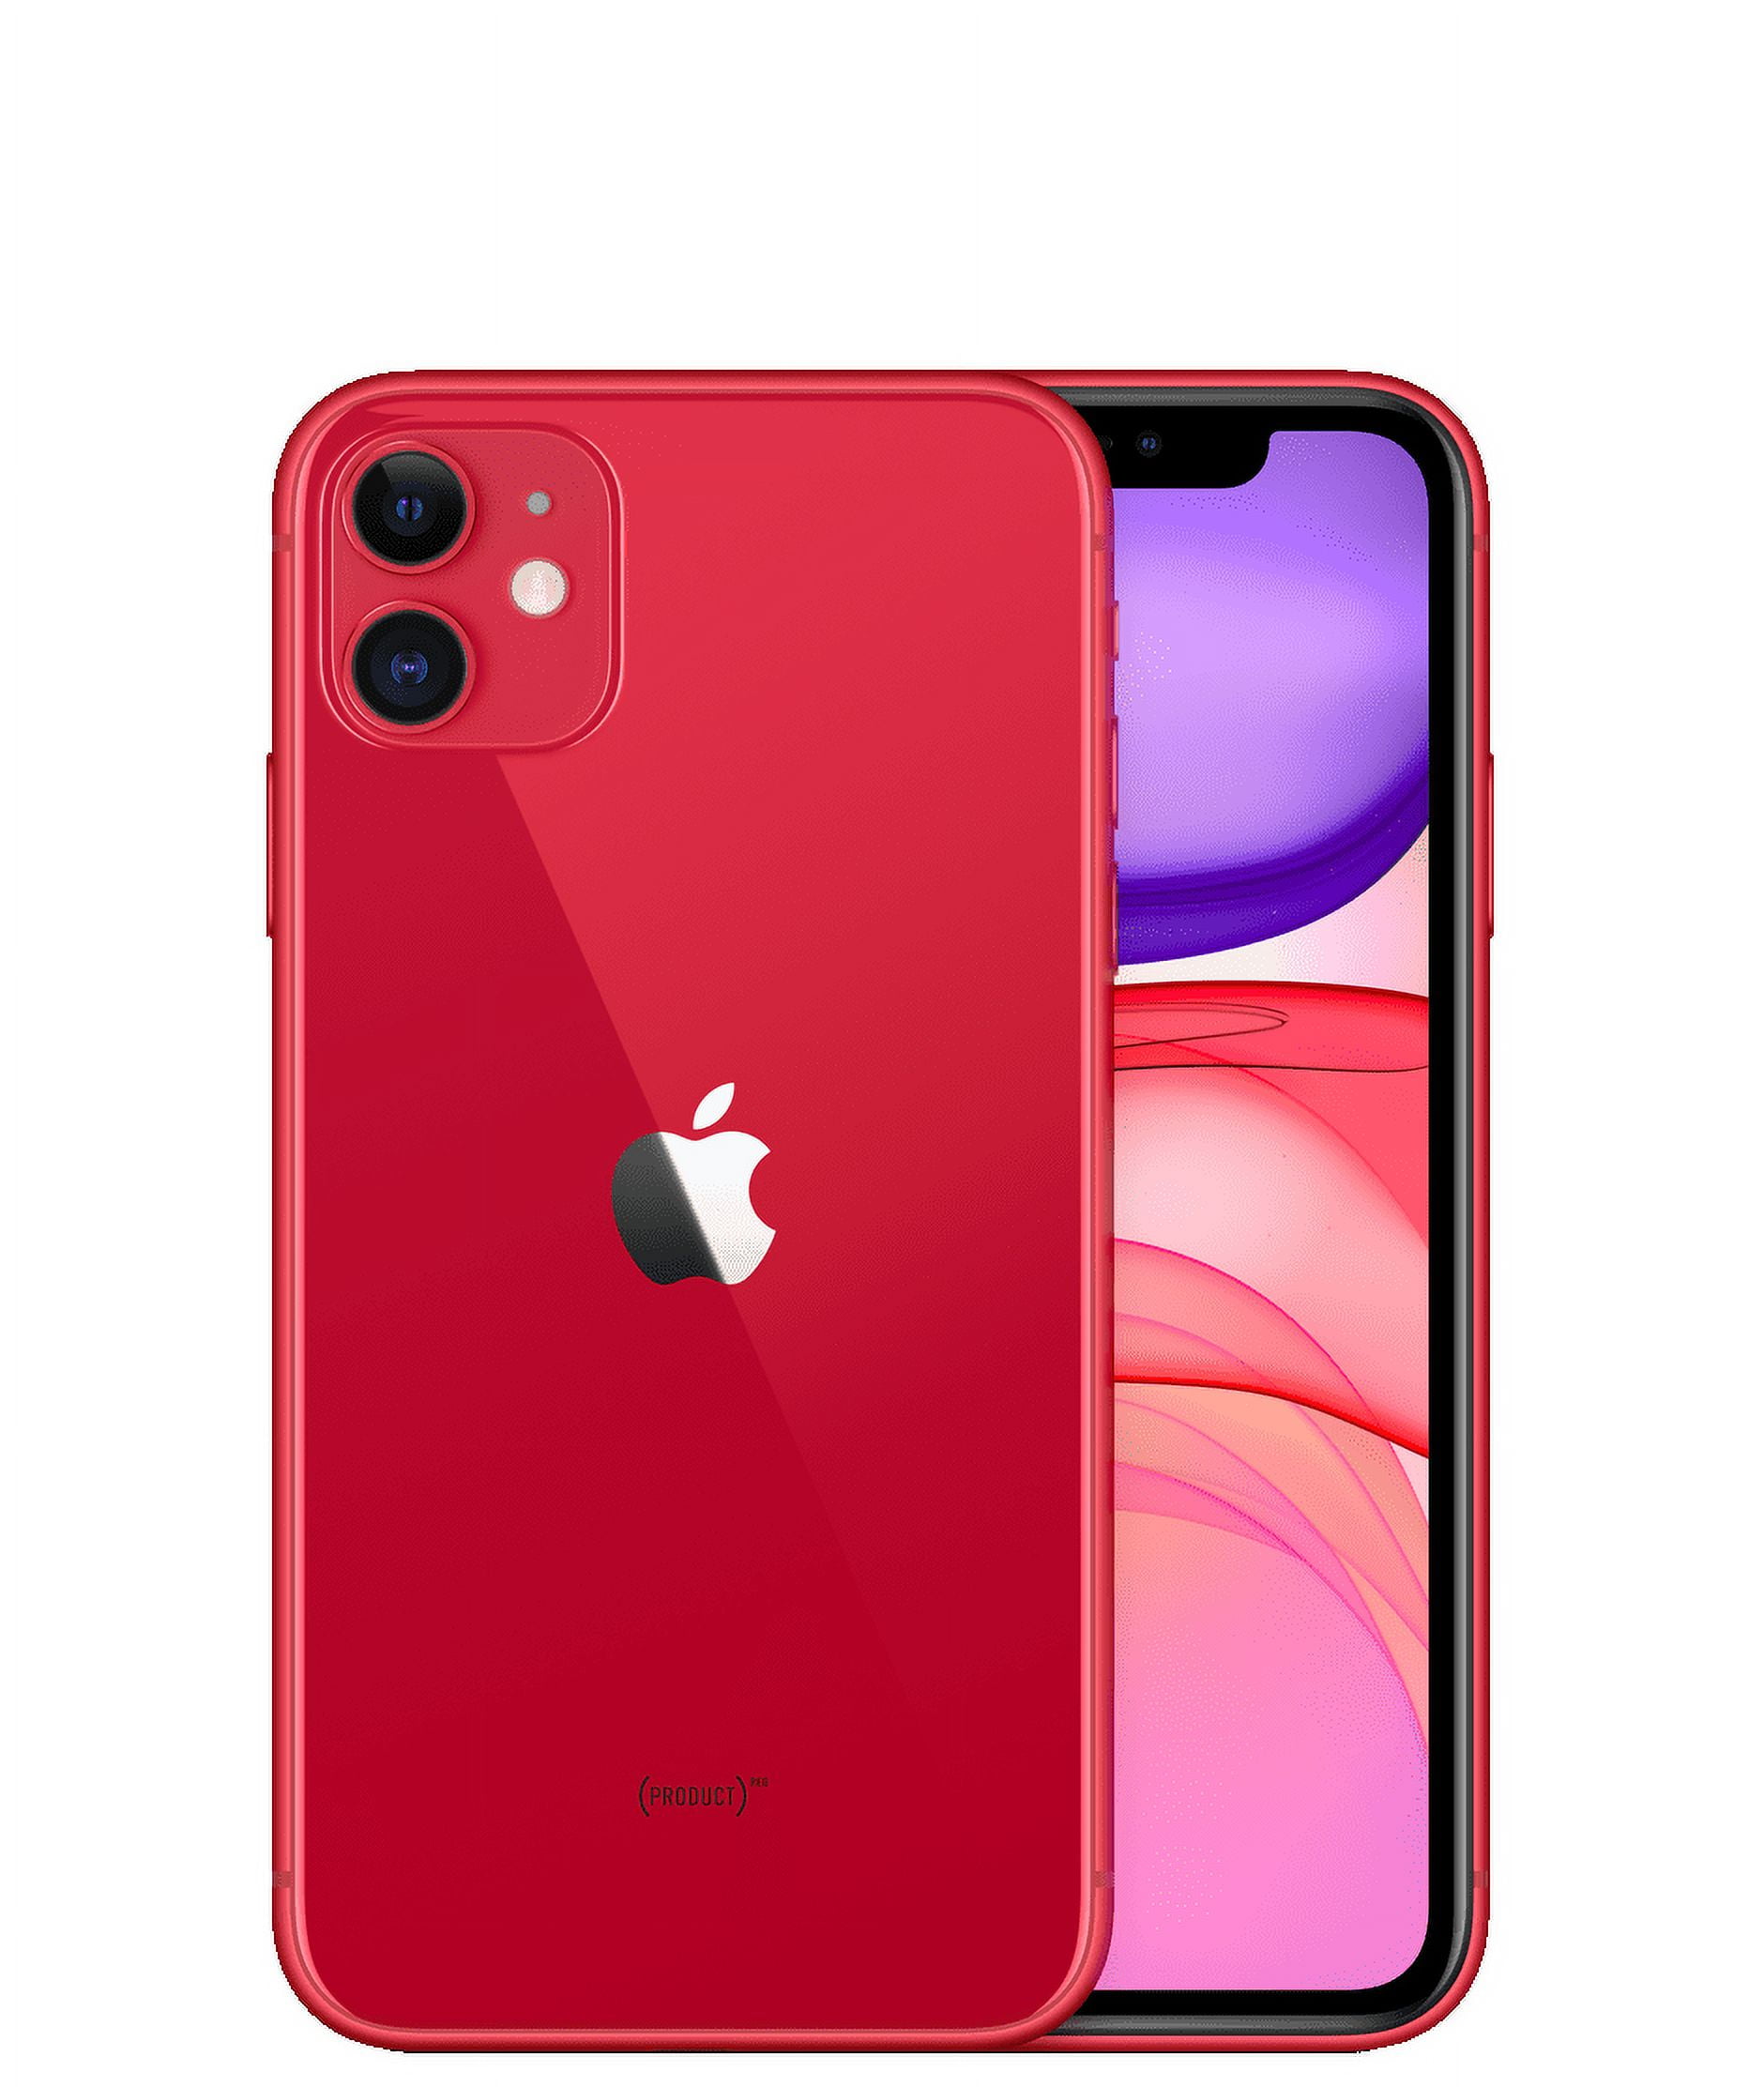 Apple iPhone 11 128GB Fully Unlocked Red (No Face ID) (Refurbished: Good)